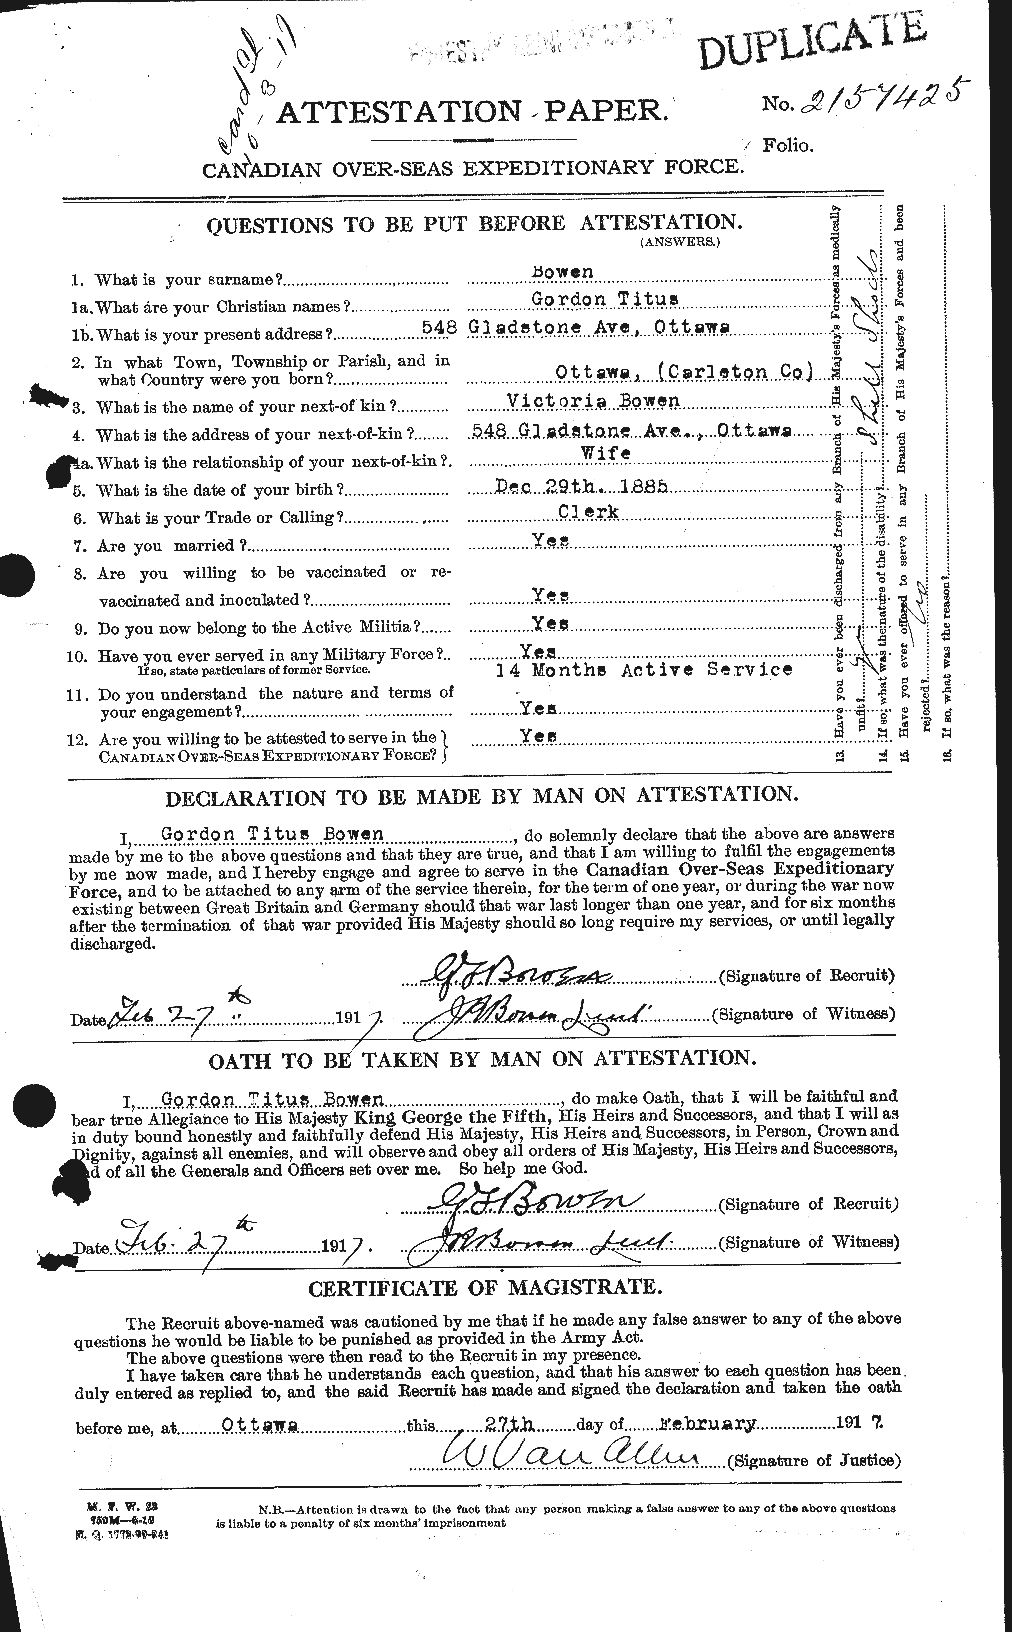 Personnel Records of the First World War - CEF 255406a